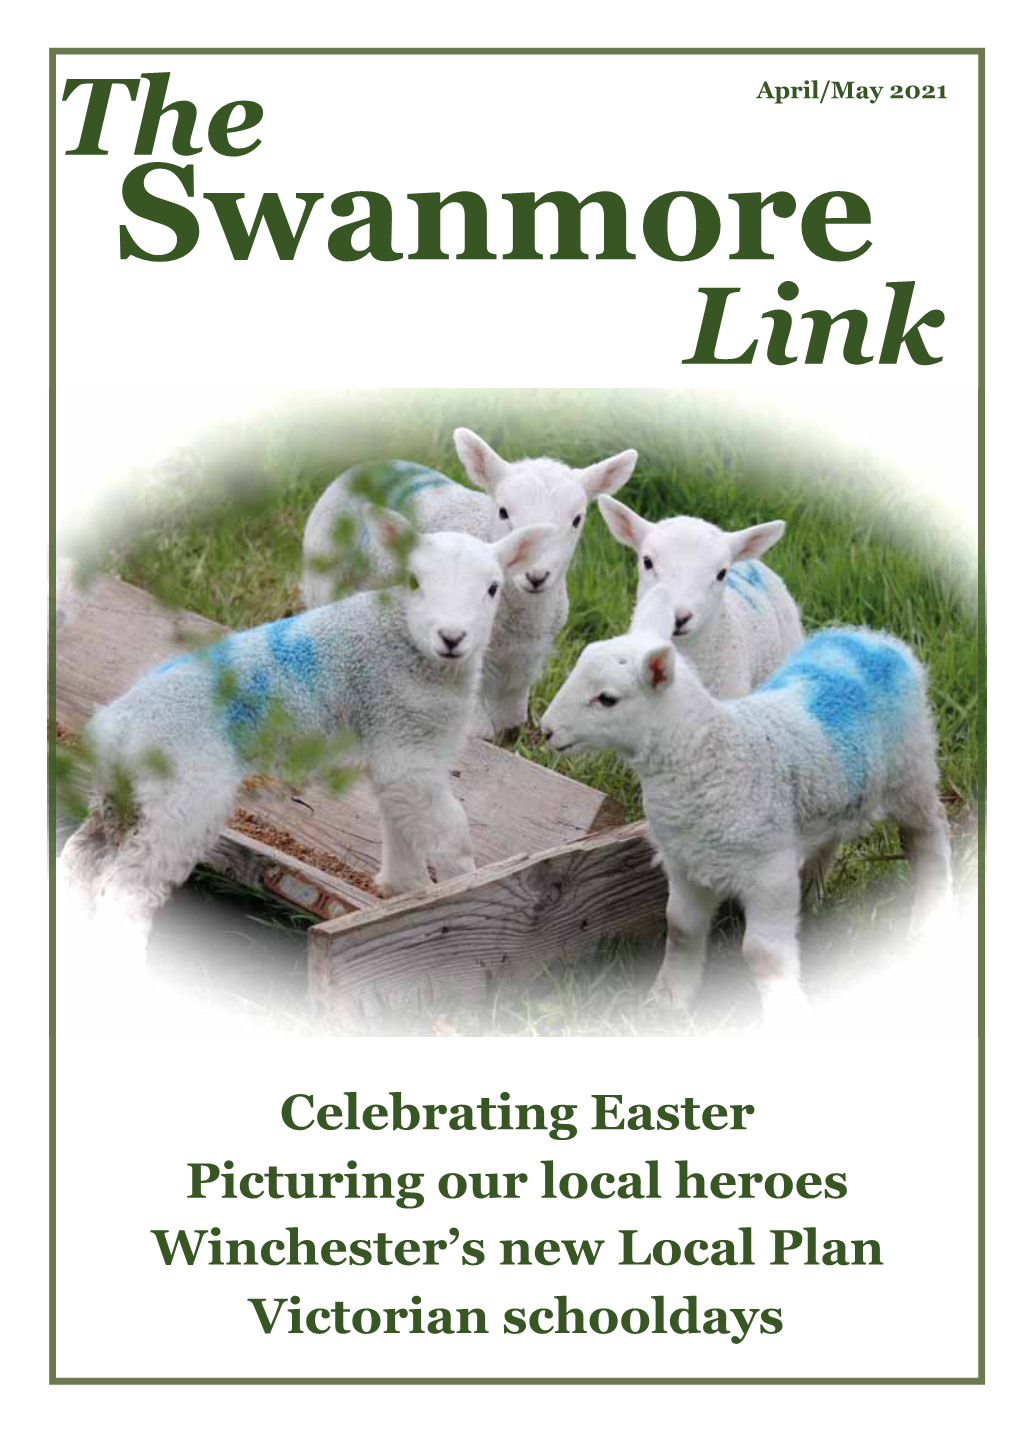 The Swanmore Link: April/May 2021